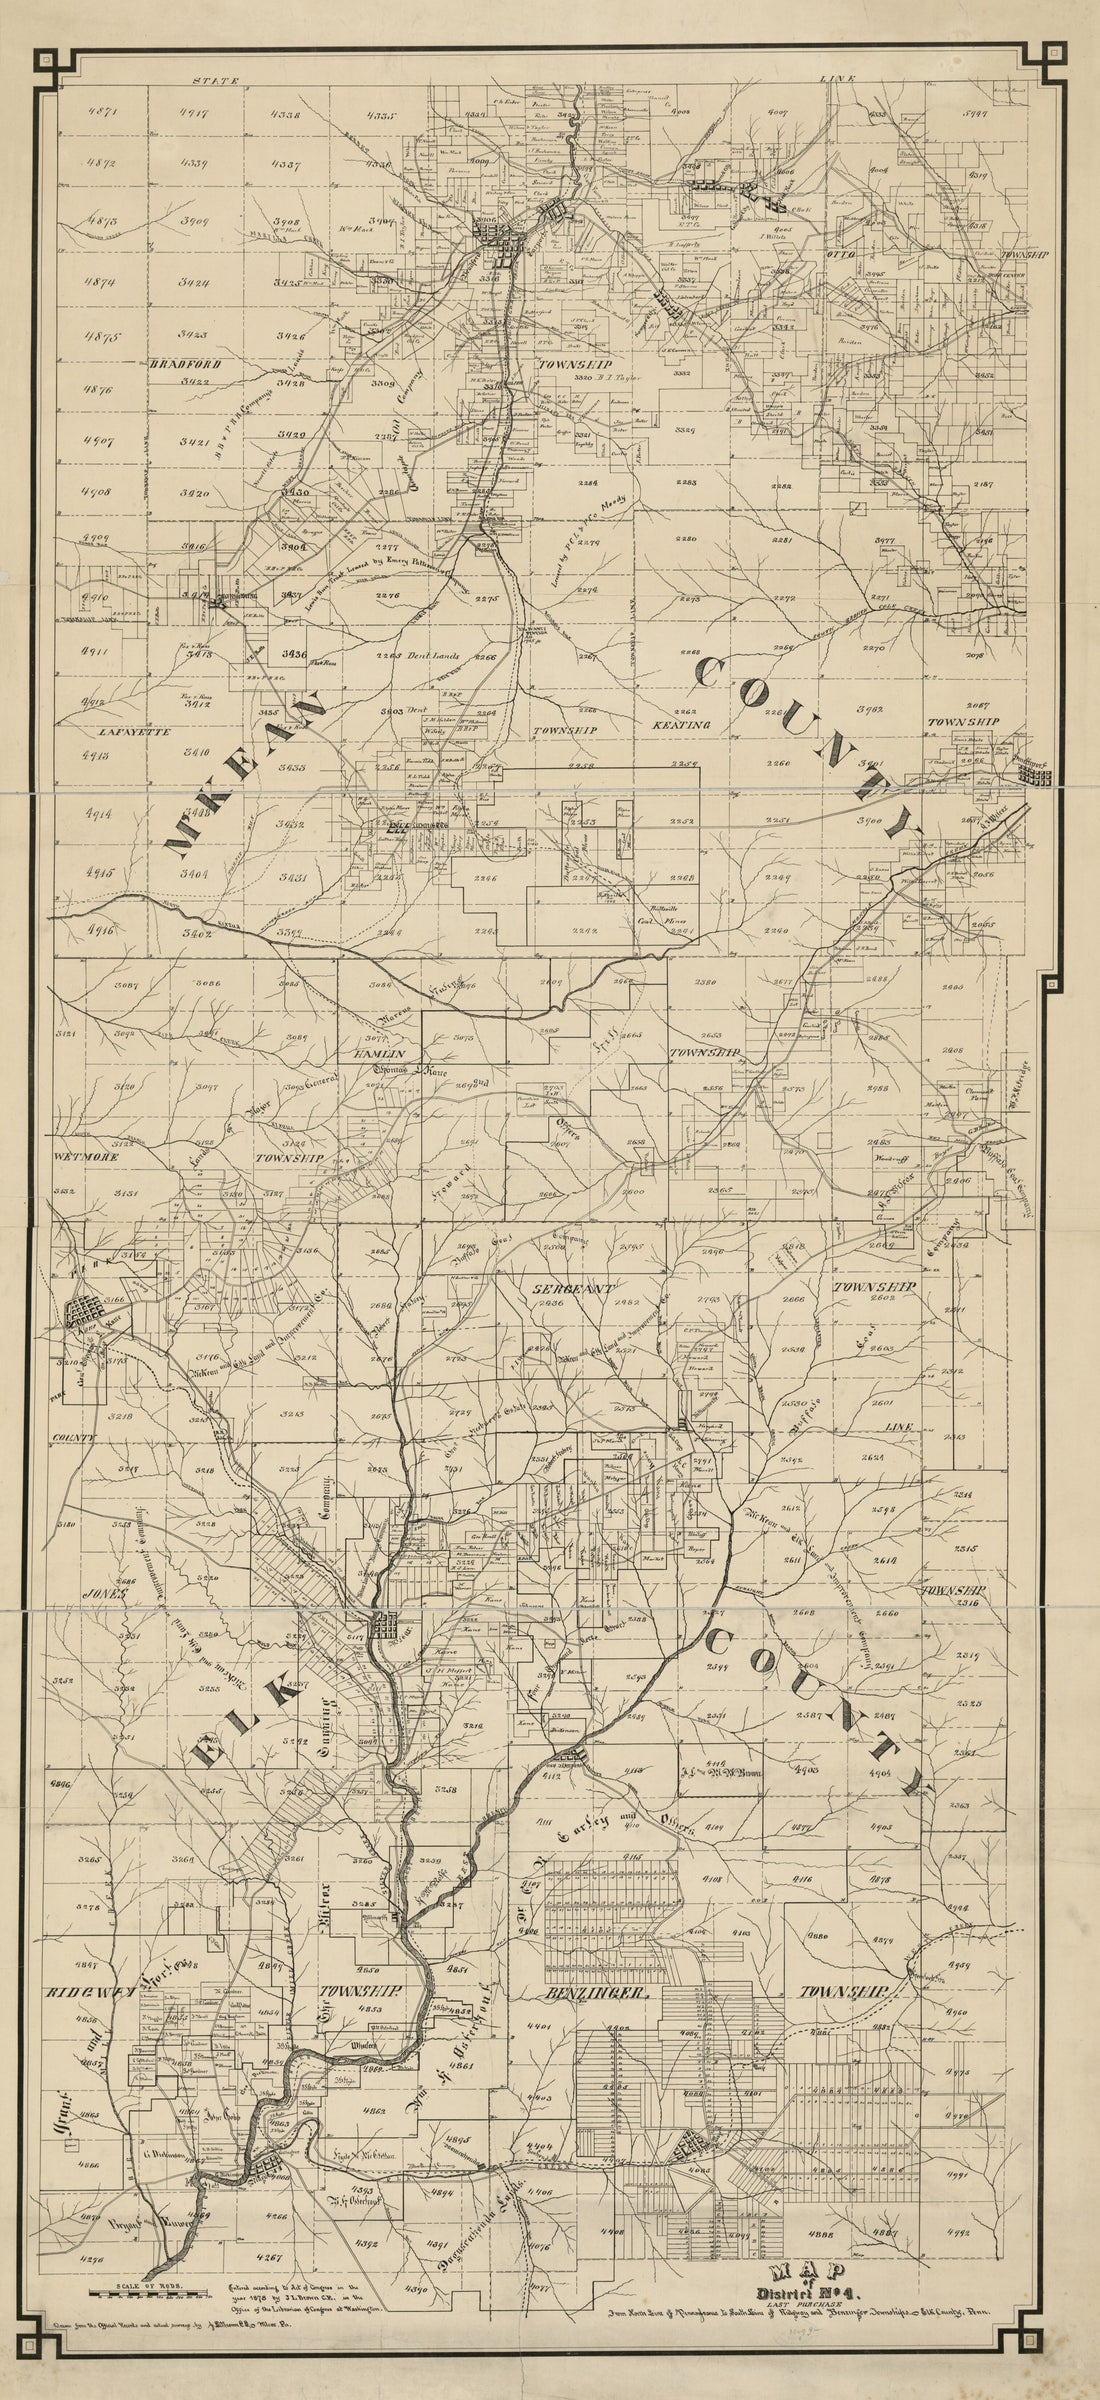 This old map of Map of District No. 4., Last Purchase : from North Line of Pennsylvania to South Line of Ridgway and Benninger Townships, Elk County, Pennsylvania : parts of Elk and McKean Counties, Pennsylvania from 1878 was created by J. L. Brown in 18